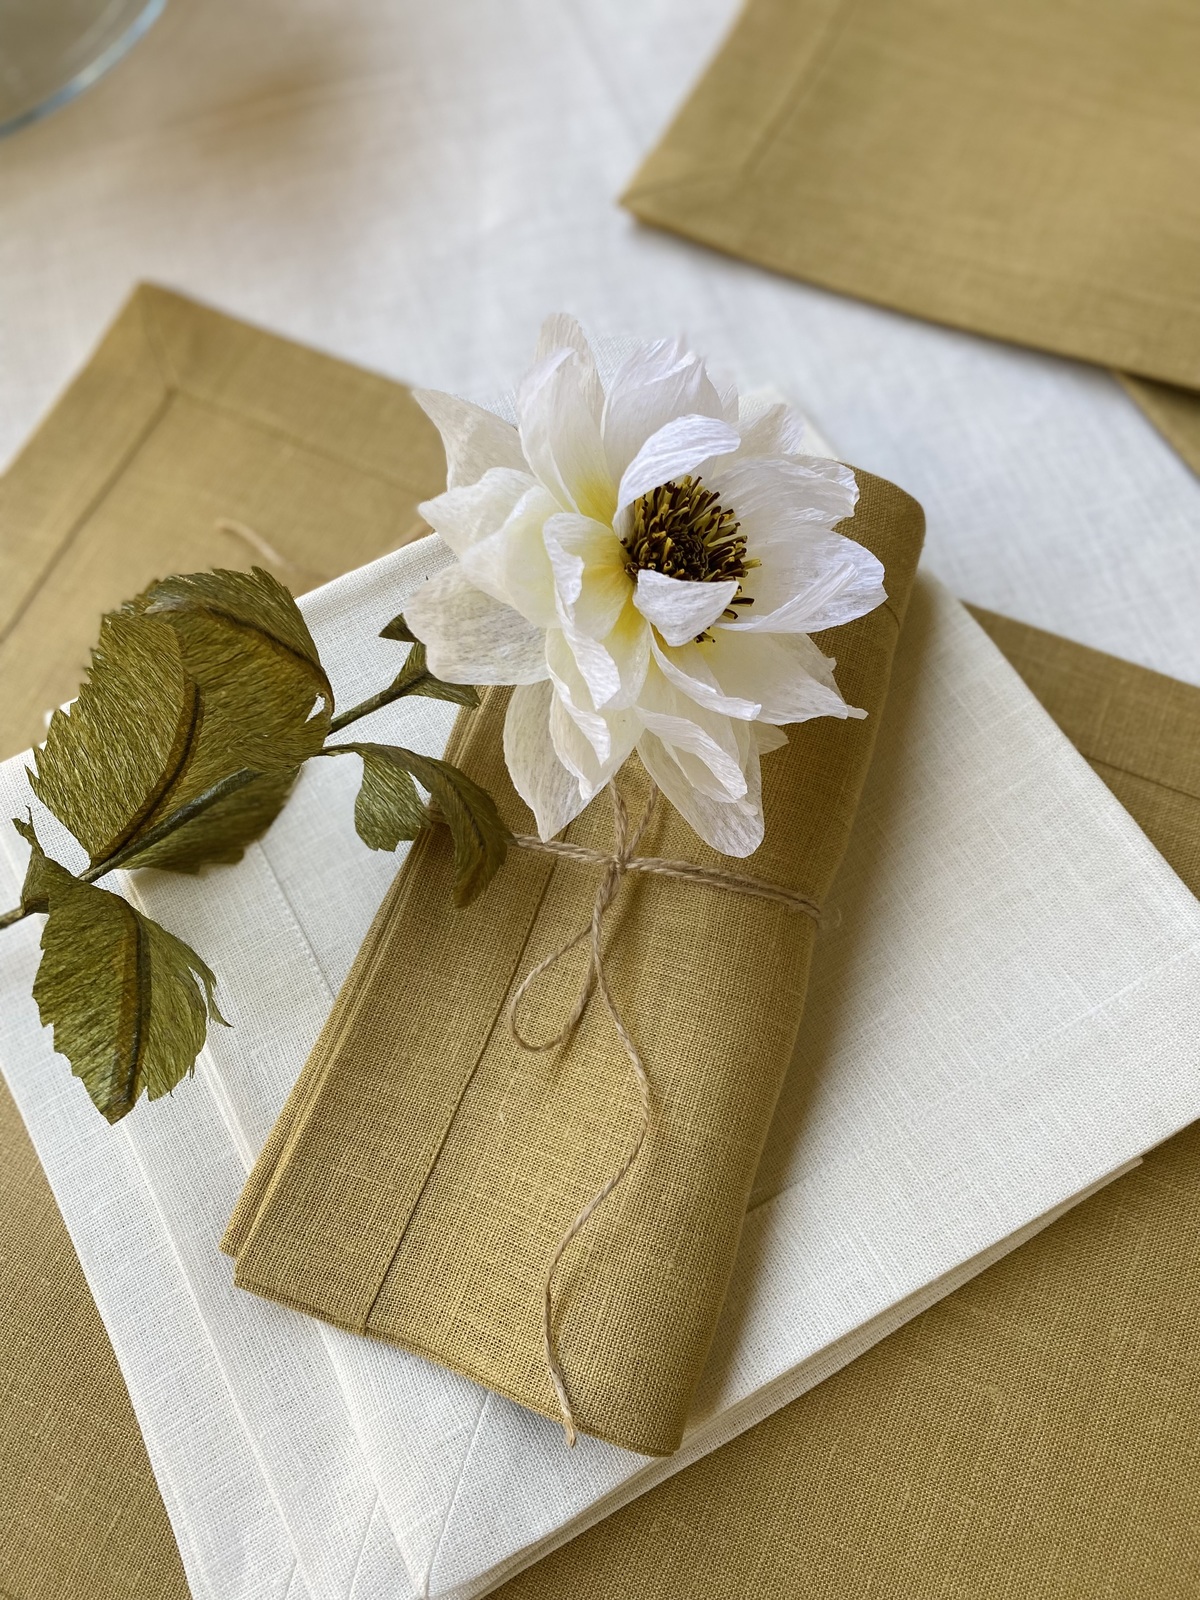 Organic pure linen napkins 17,7" x 17,7", Handmade, High quality made in Italy - $12.00